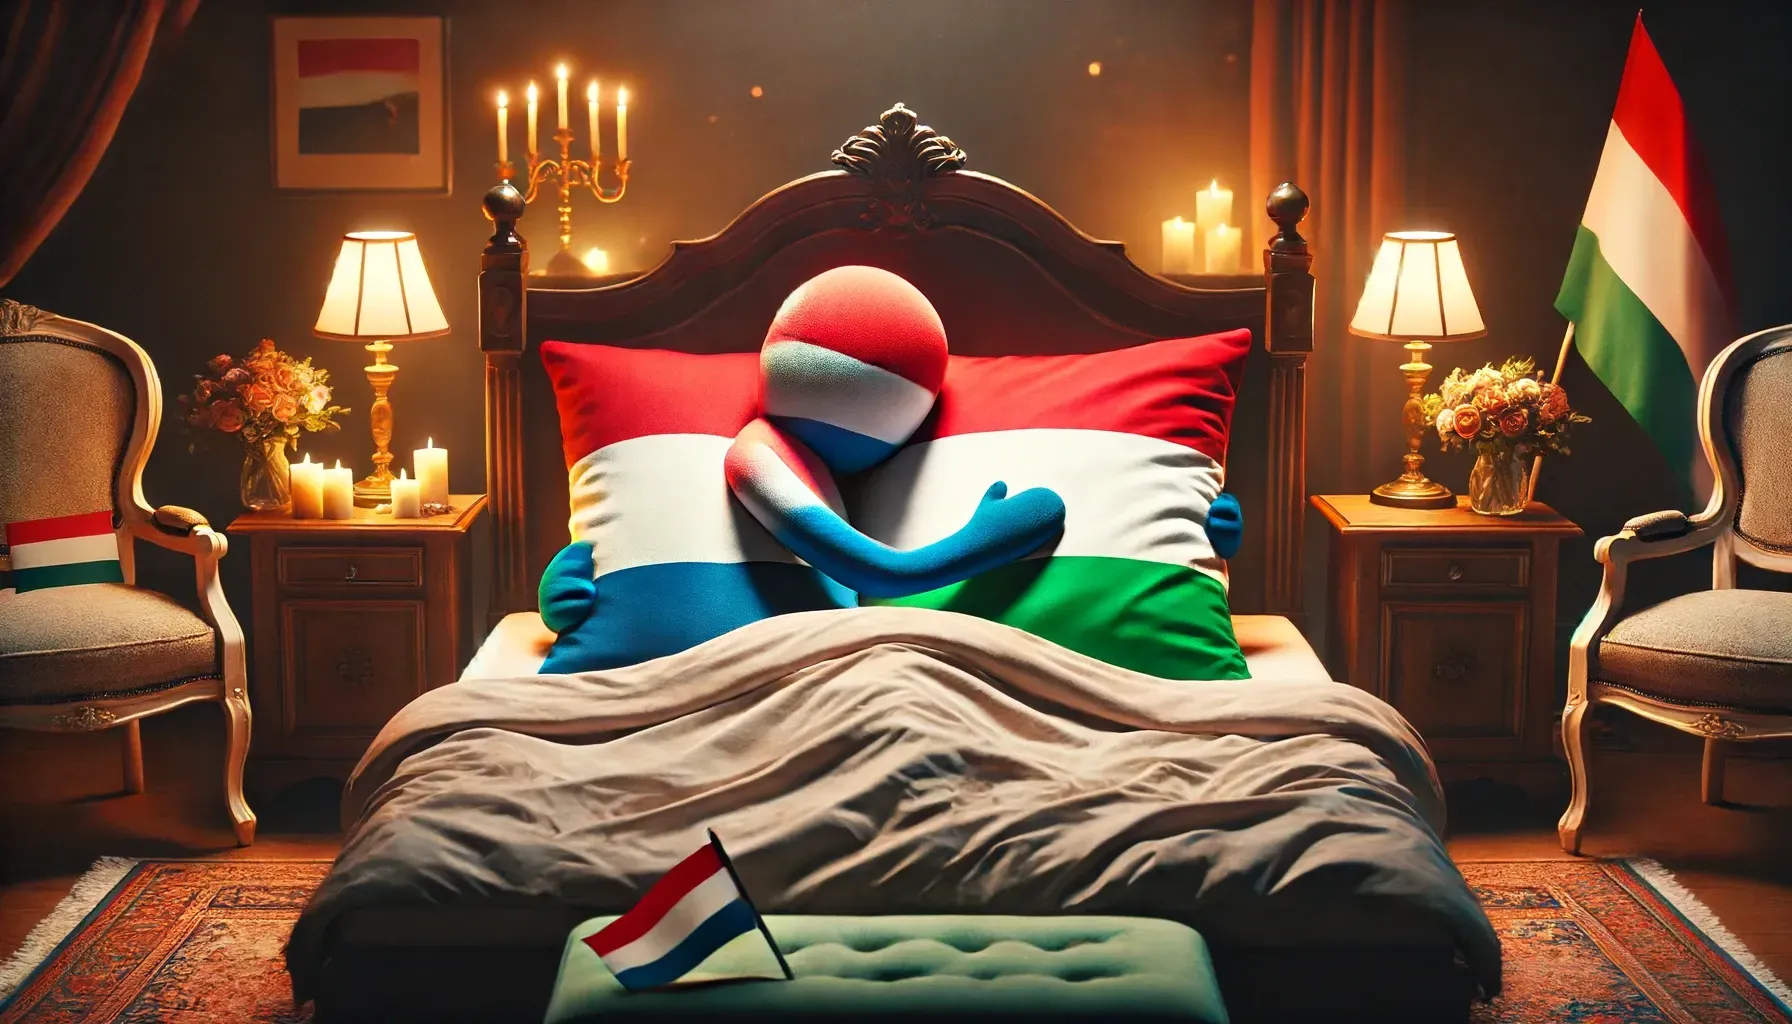 dalle 2024 06 18 112215 a romantic scene showing the dutch flag and the hungarian flag hugging each other in bed the setting is cozy and intimate with soft lighting and a w